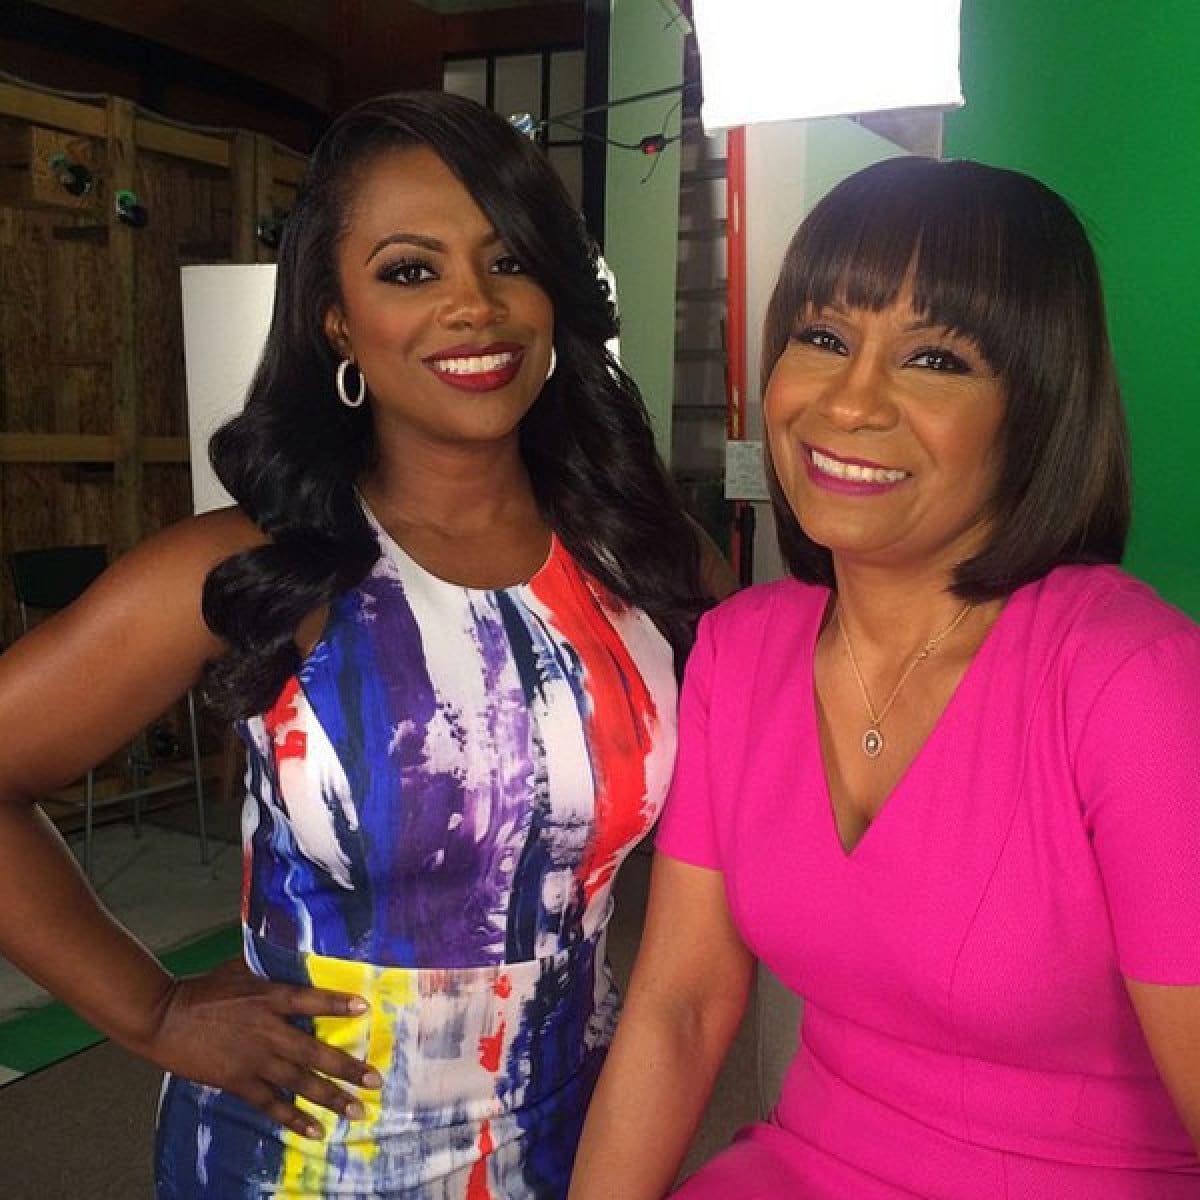 Kandi Burruss Is Twinning With Mama Joyce While Showing Off Their Ginger Short Hairdos In A Throwback Photo To When Riley Burruss Was About 11 Years Old